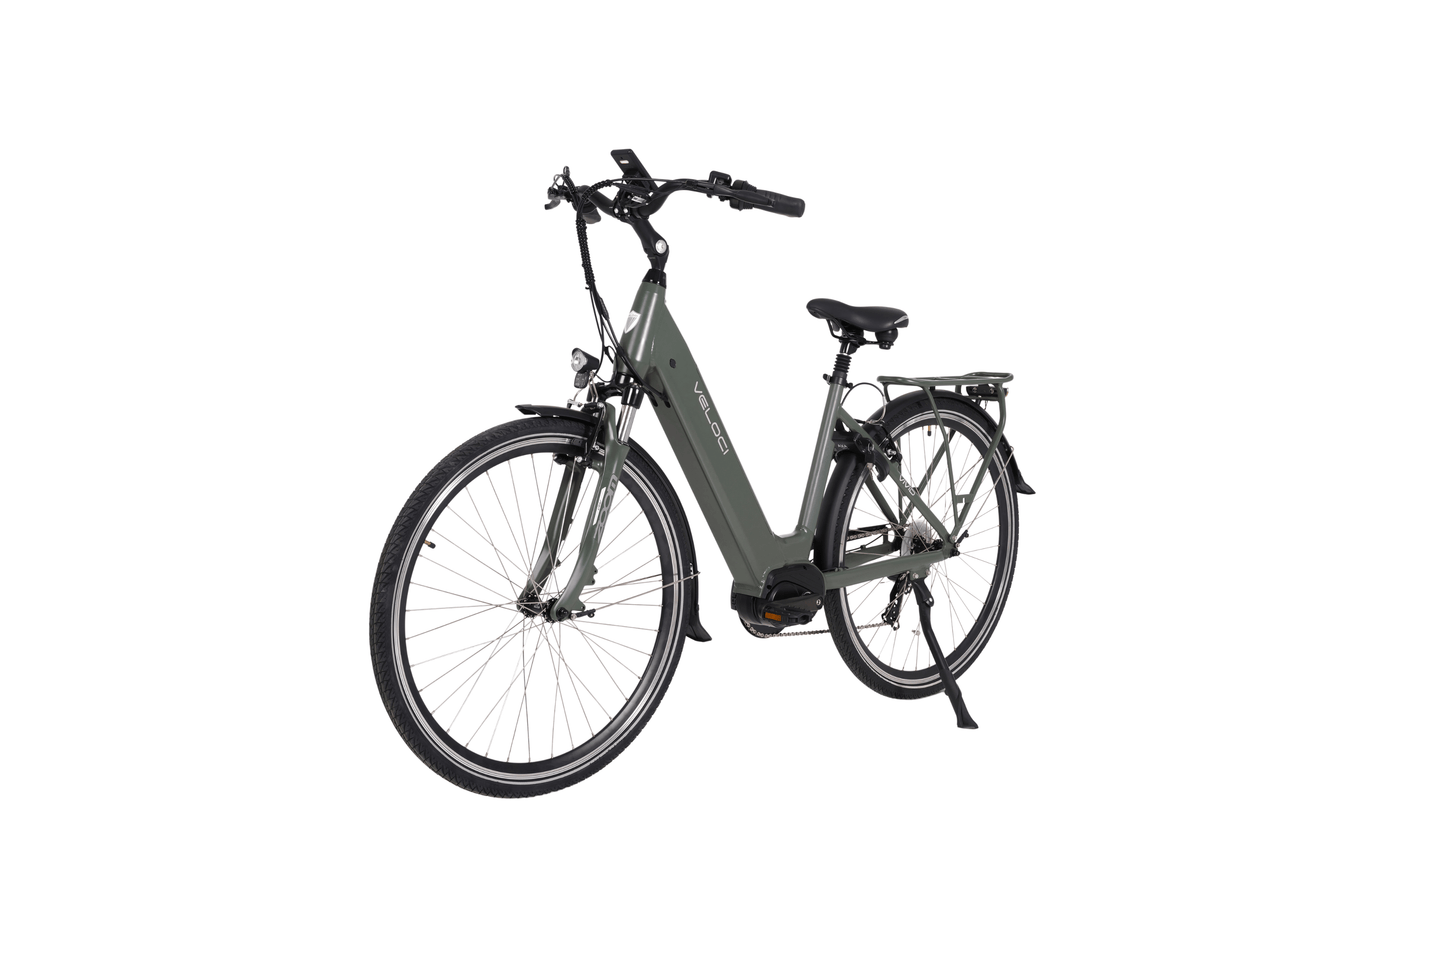 Veloci Vivid outlet e-bike available for sale. Veloci Vivid e-bike with integrated downtube battery. Veloci Vivid e-bike 2nd hand available for sale.